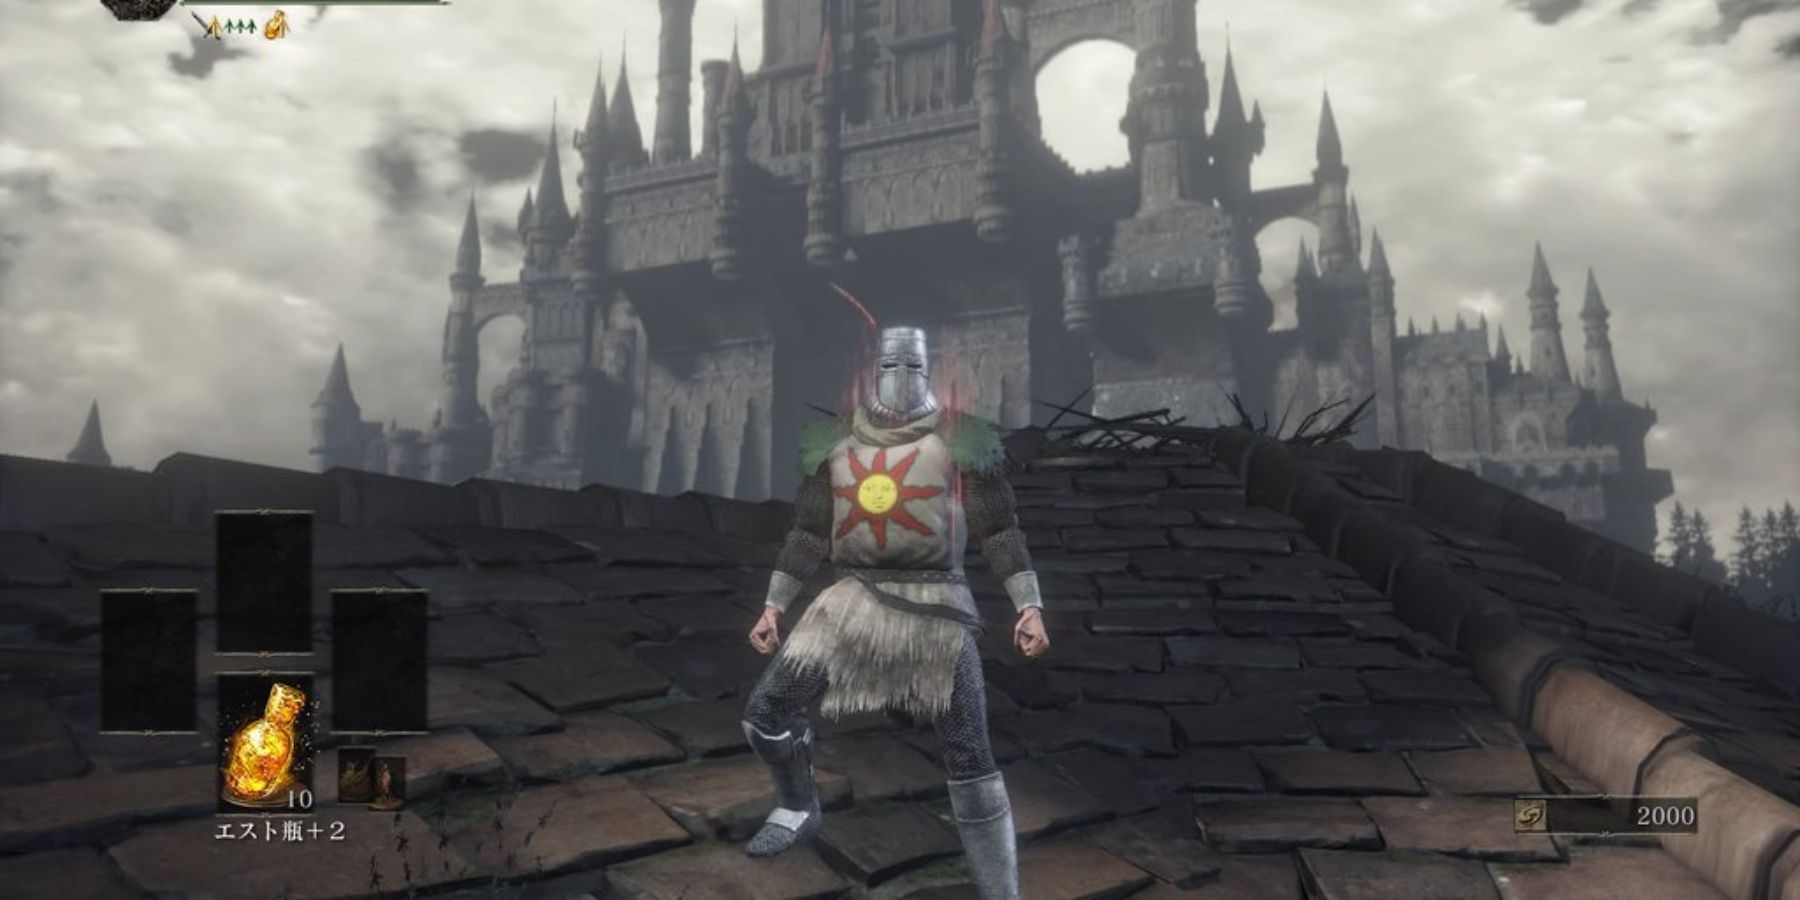 Player standing in a rooftop while wearing the Armor of the Sun set in Dark Souls 3.